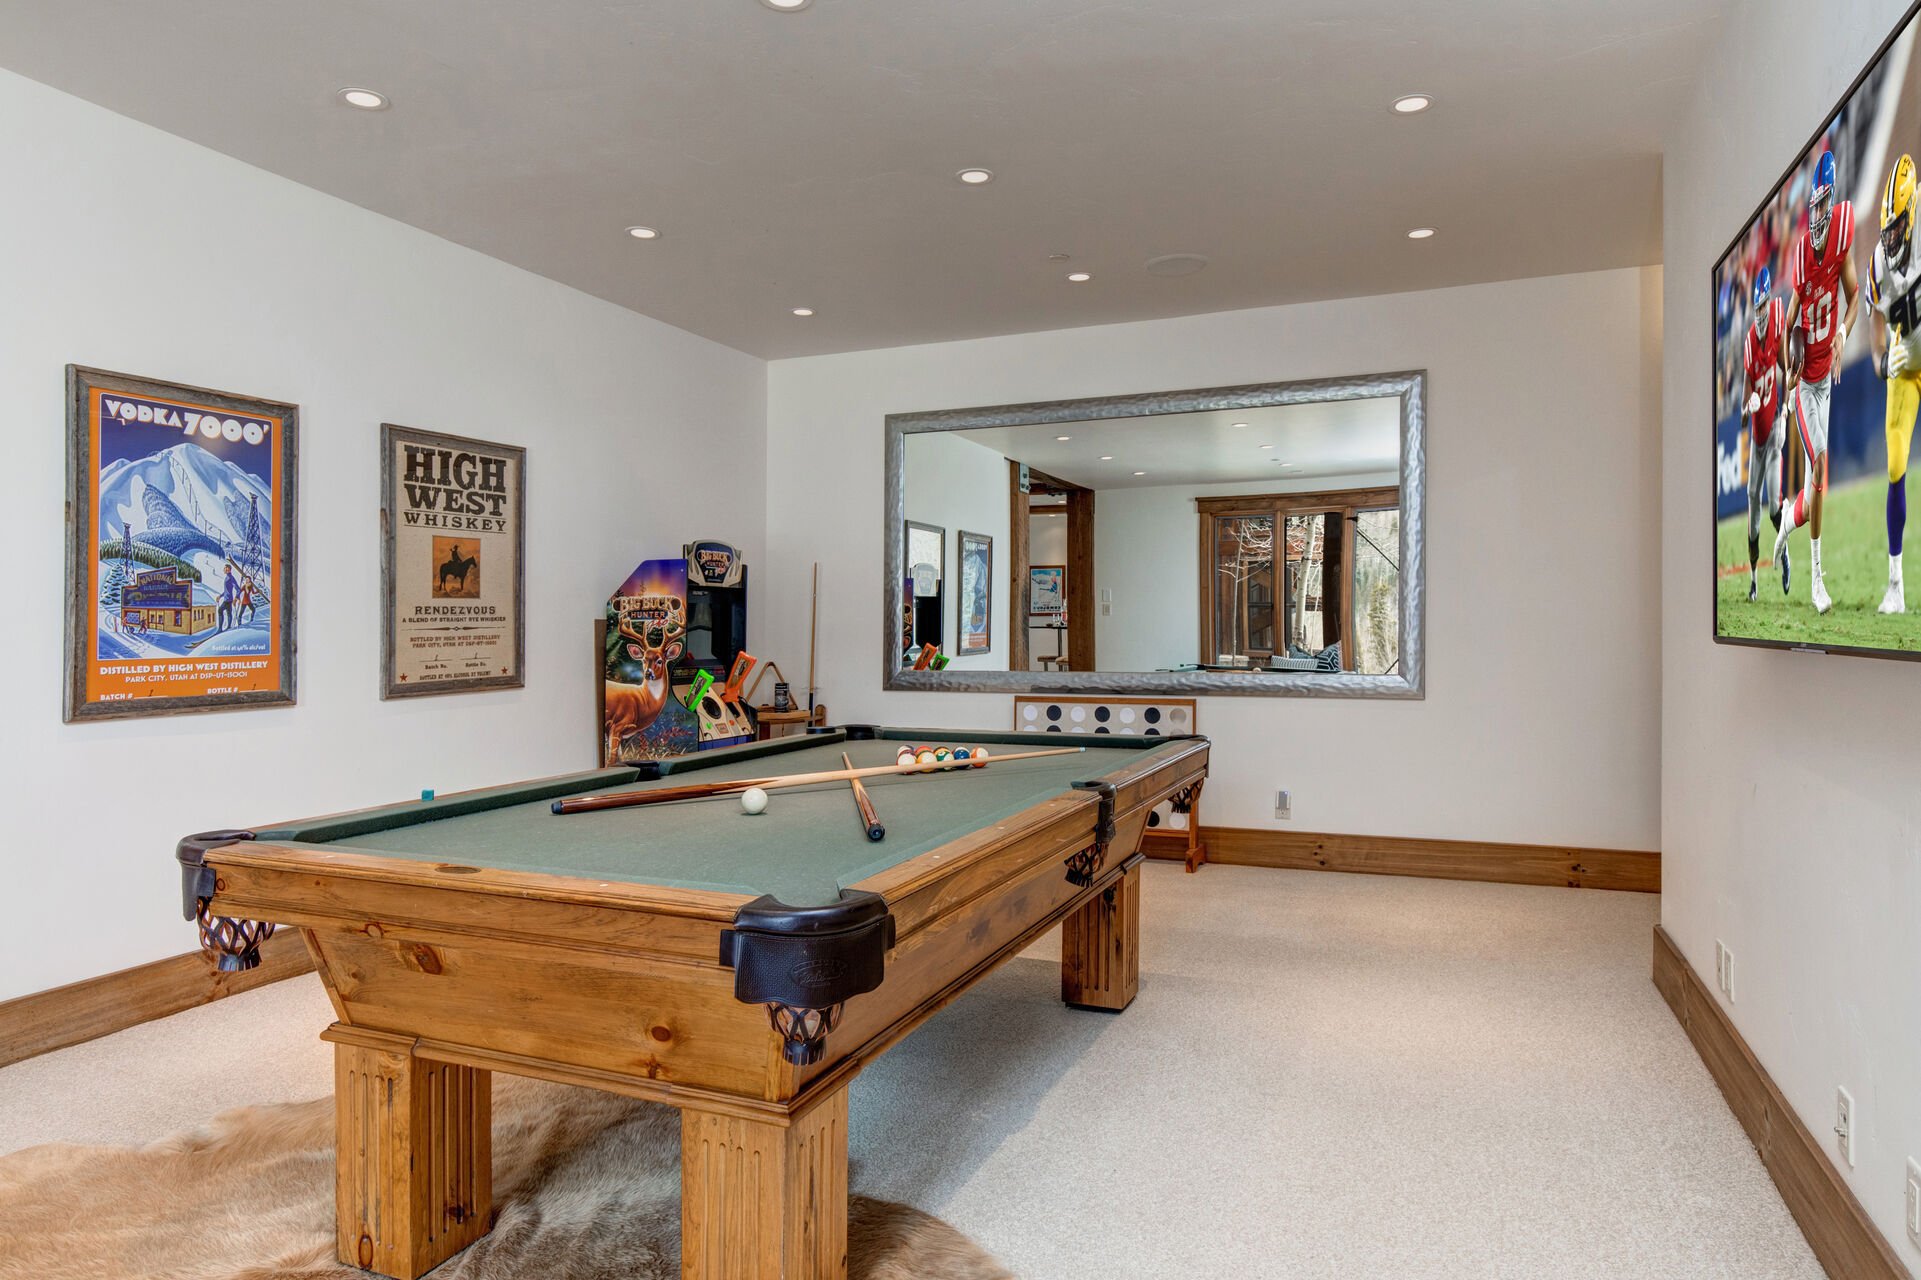 Ground level billiard area and access to Jack and Jill bathroom